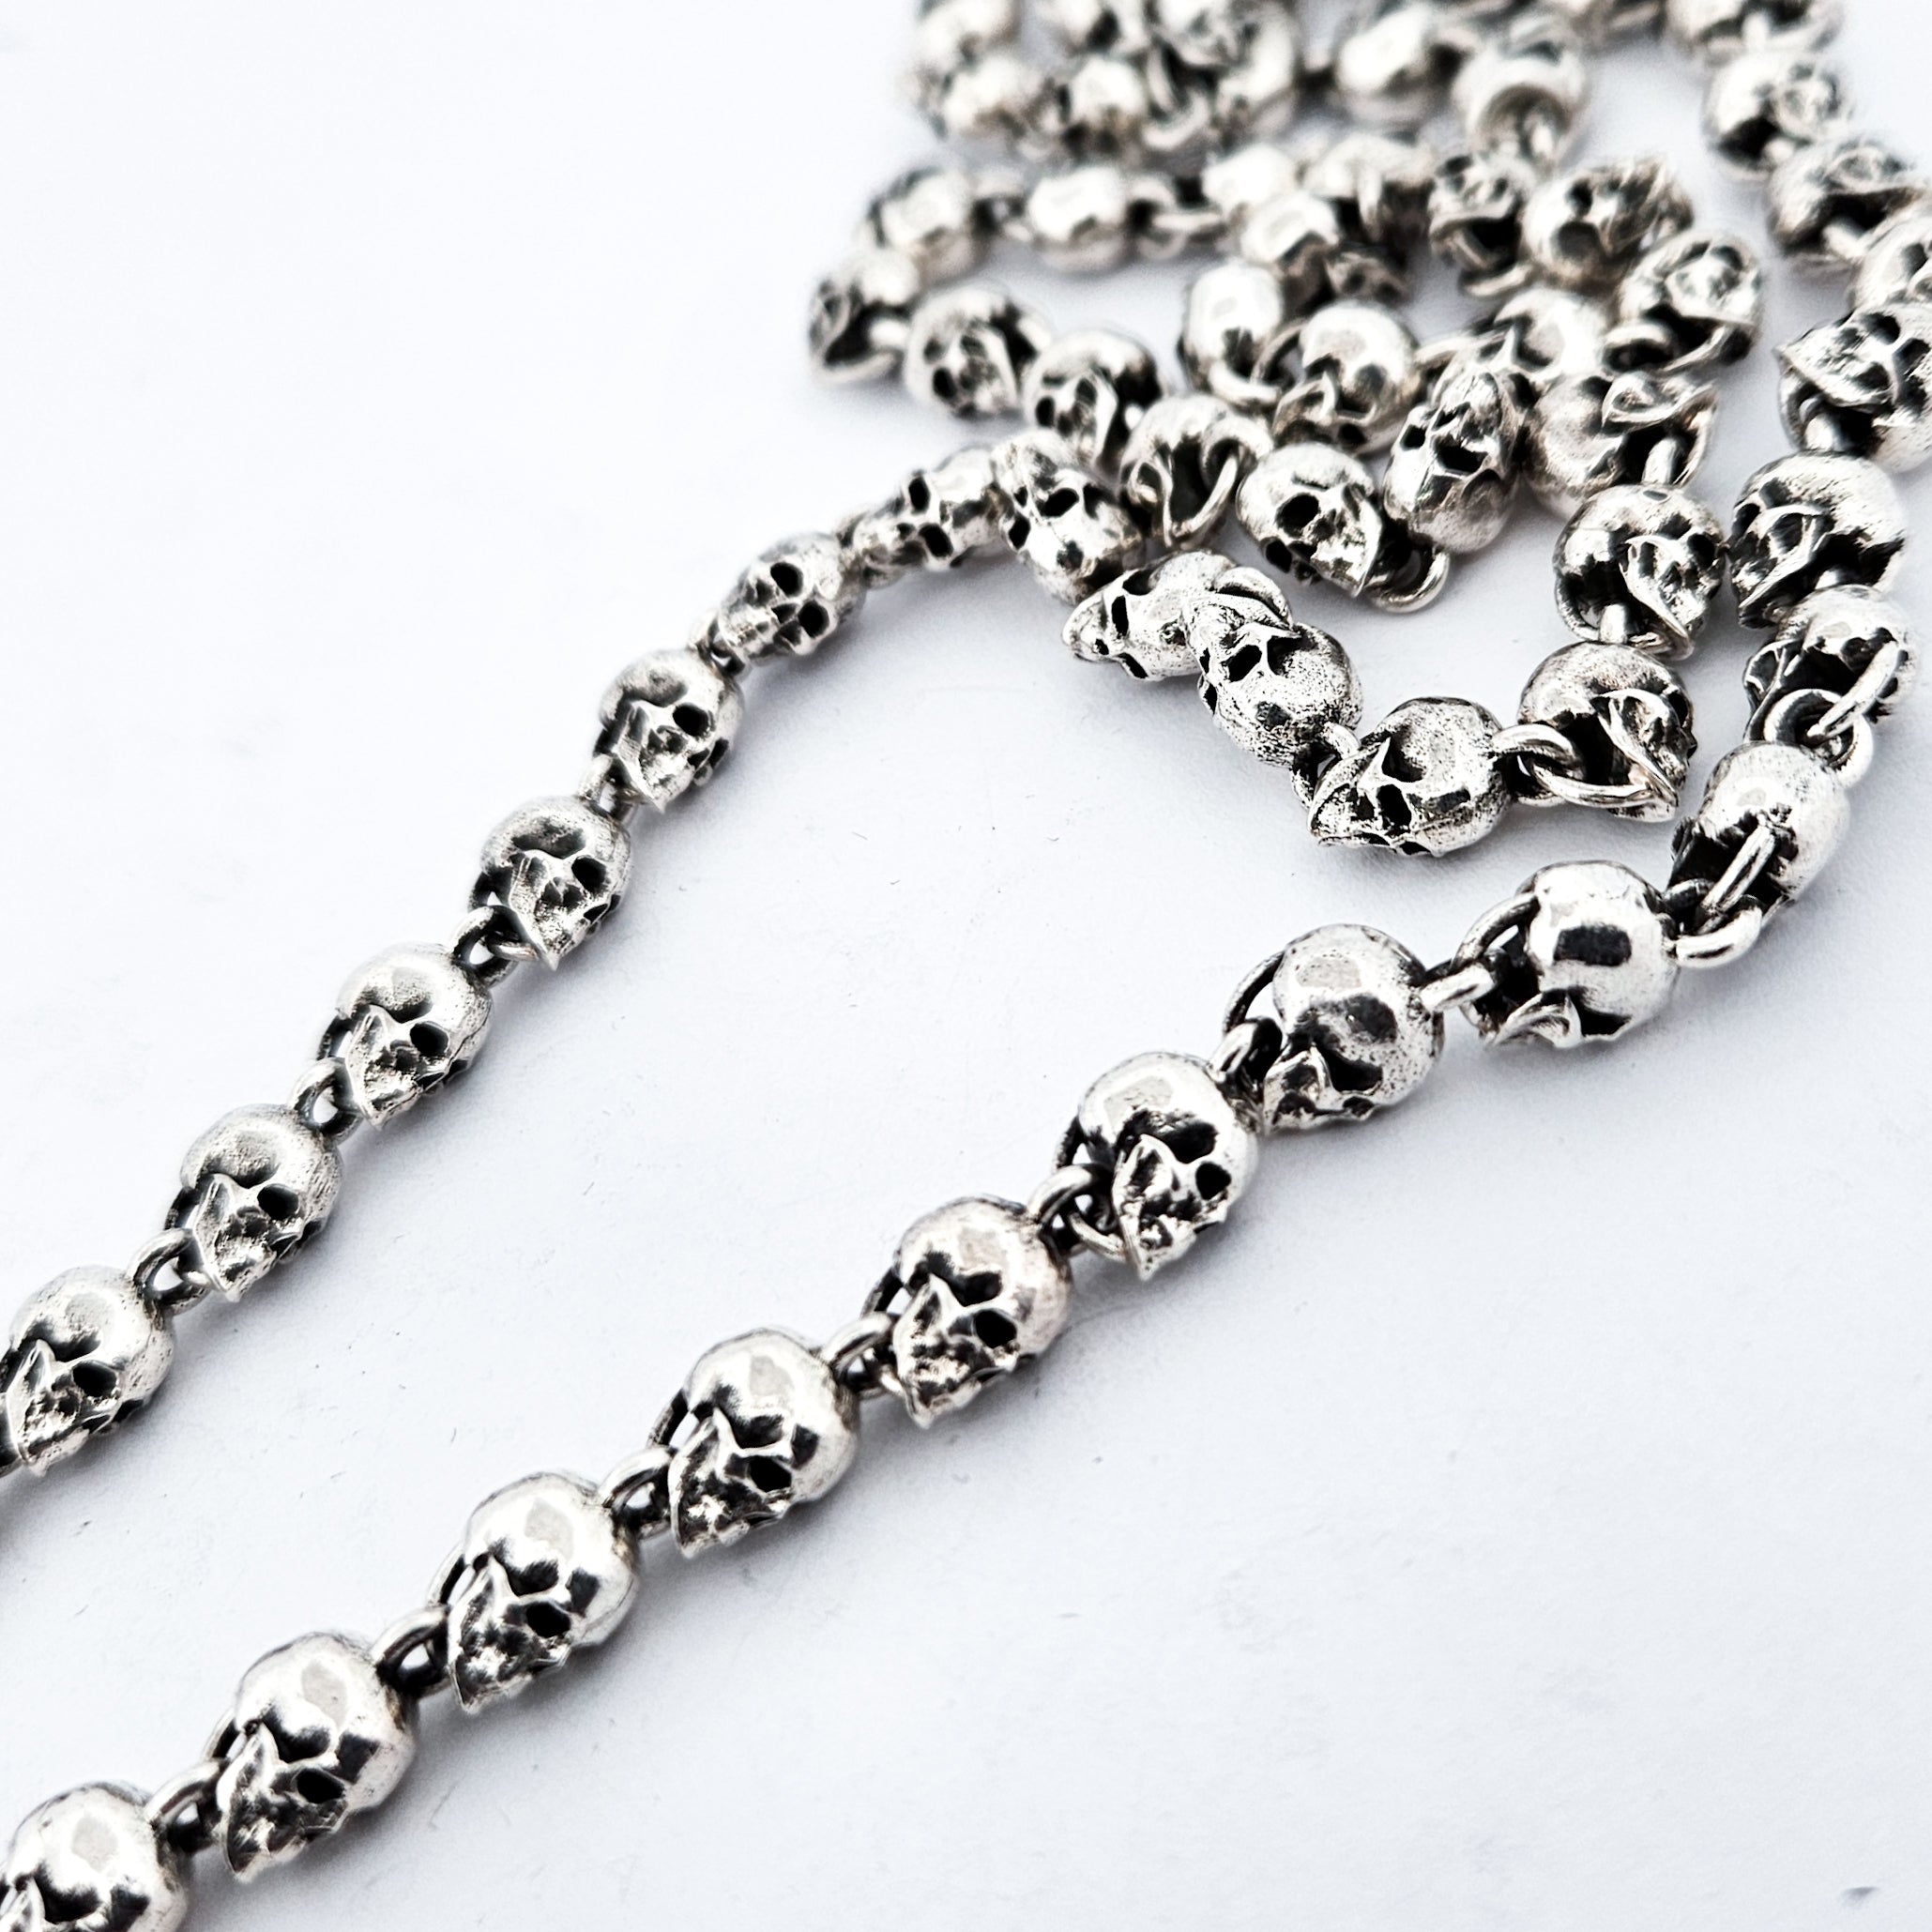 Small Skull Chain in Sterling Silver - Heavy